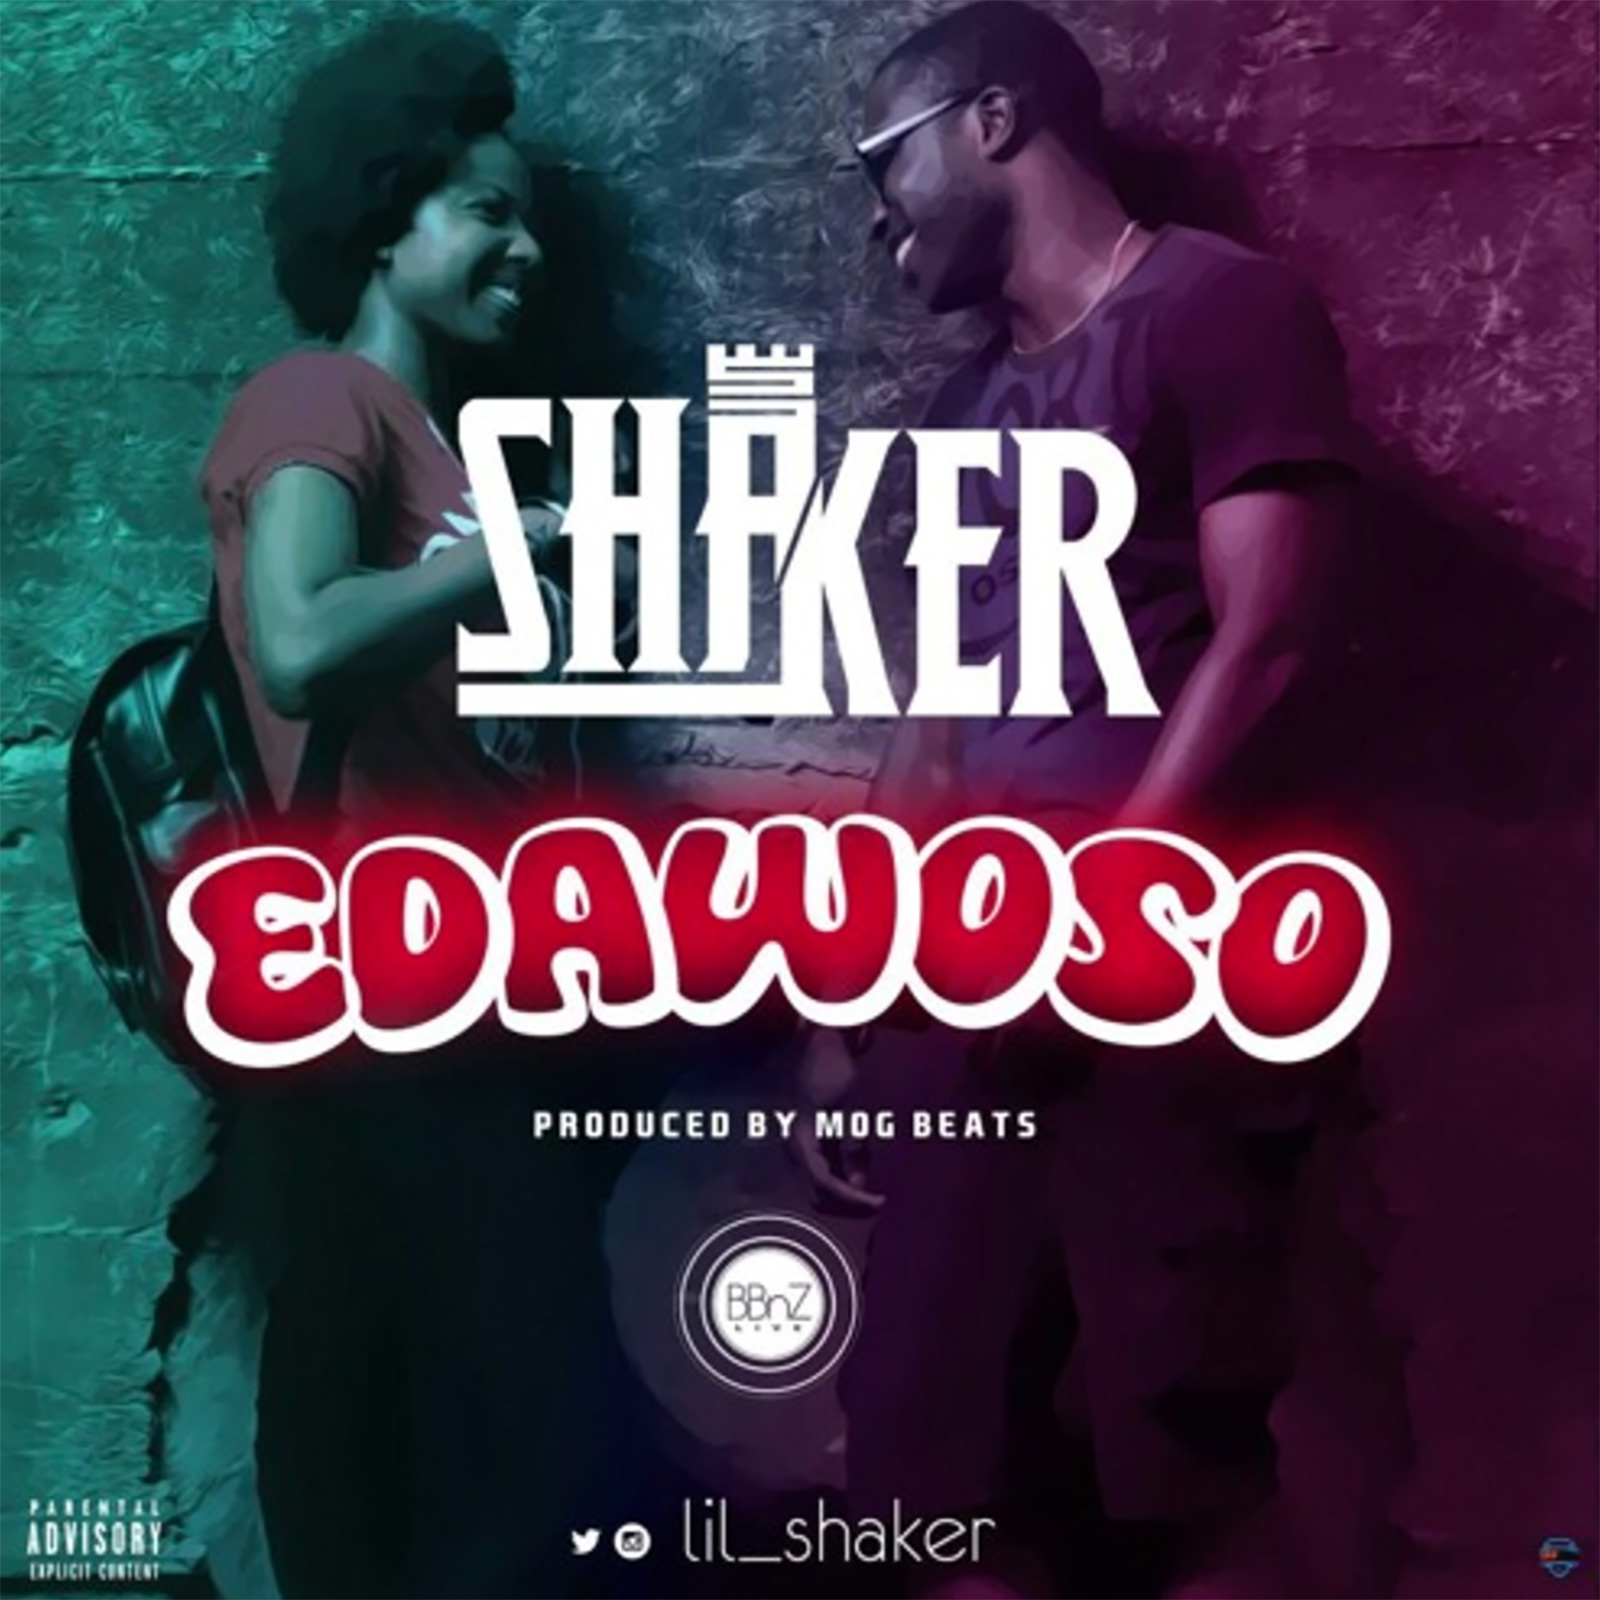 Edawoso by Shaker